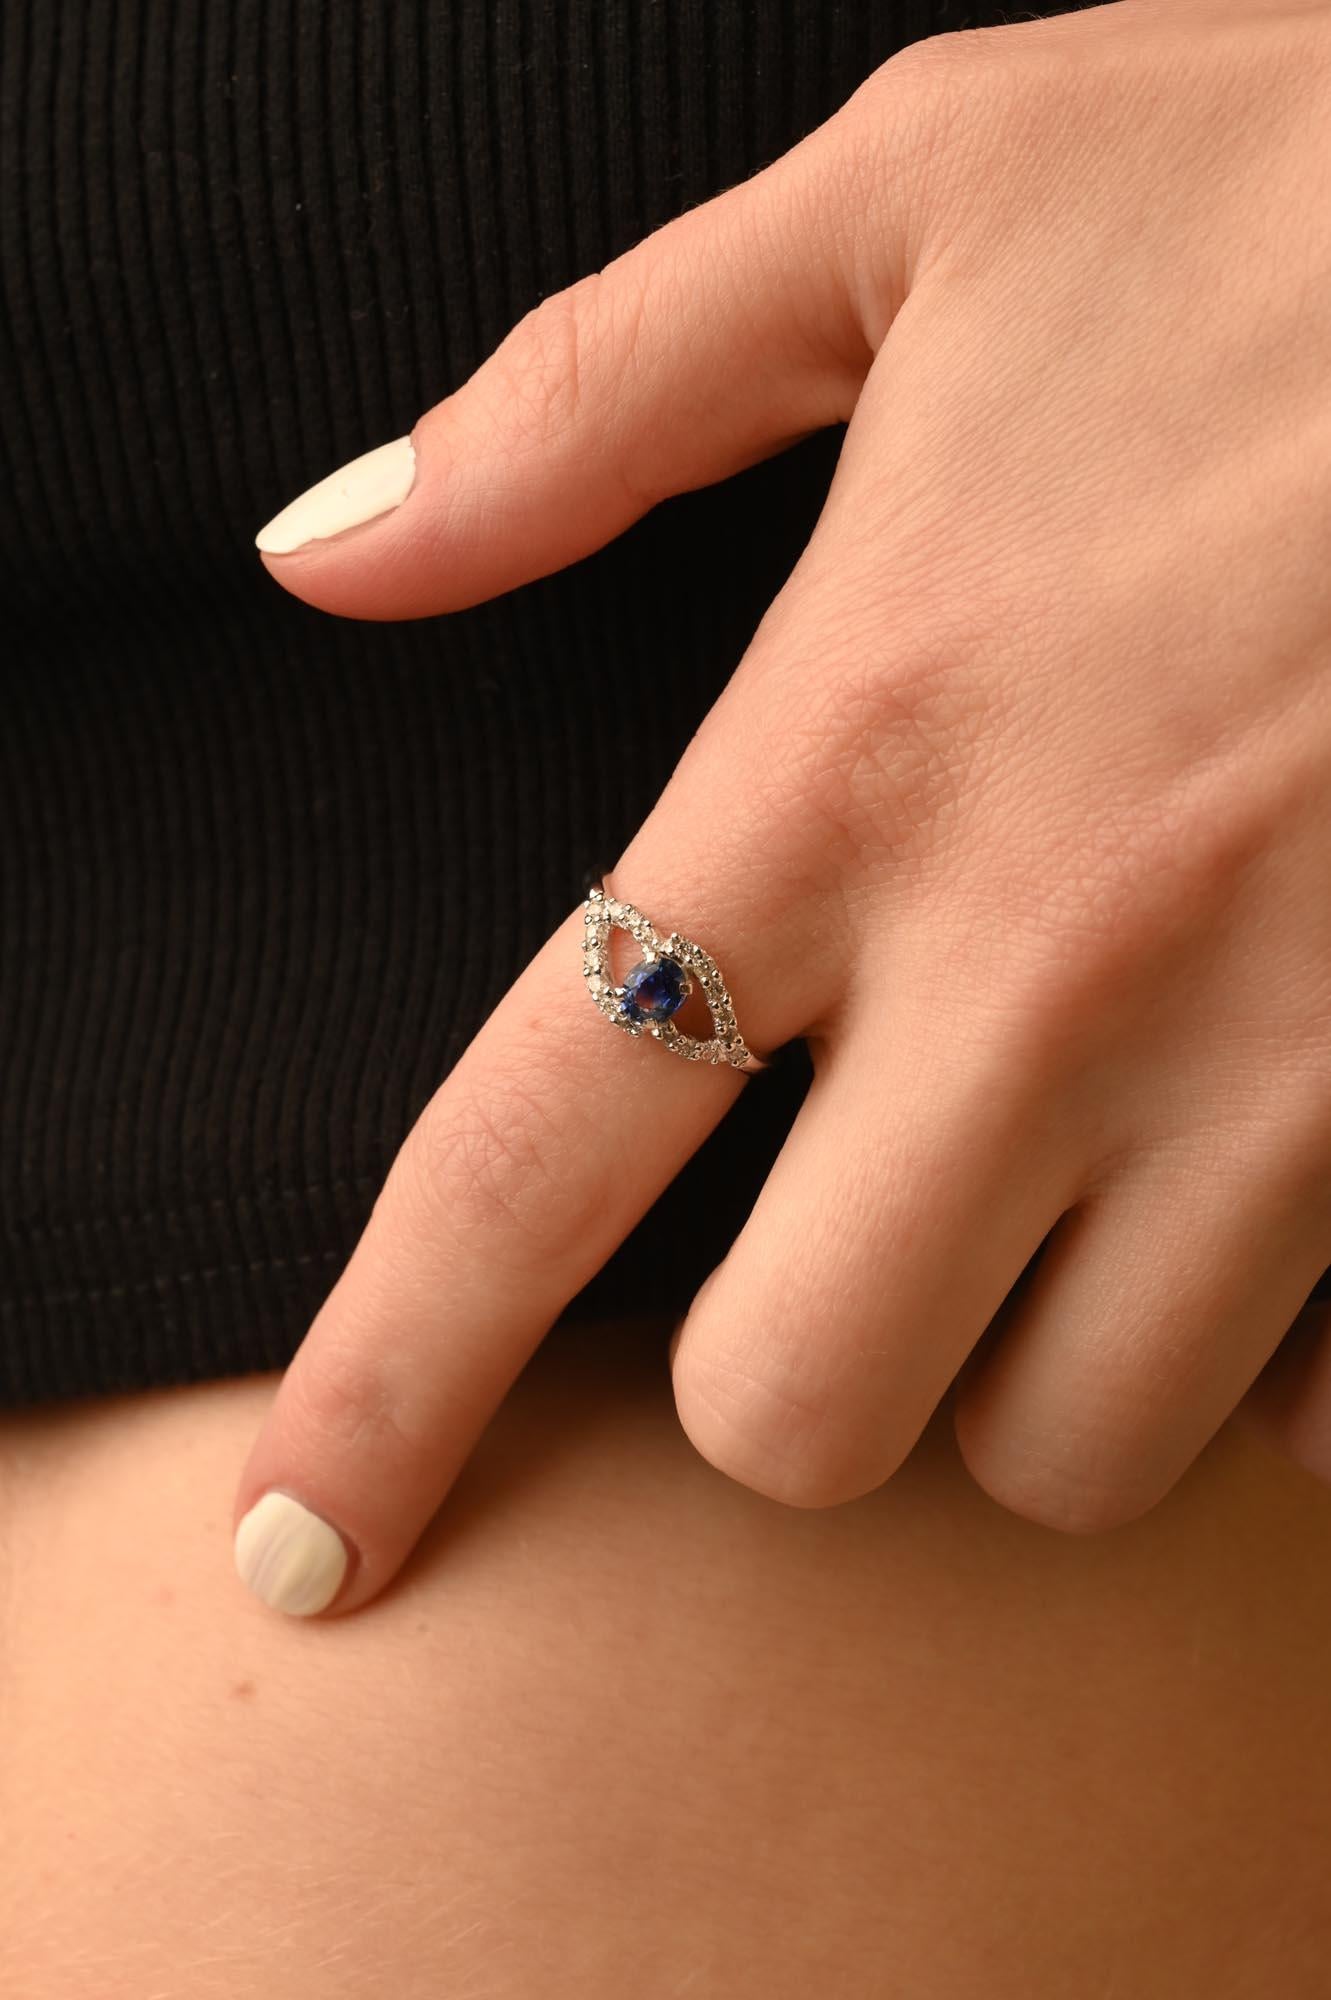 For Sale:  Alluring Blue Sapphire Ring with Diamonds Set in 14K Solid White Gold 6